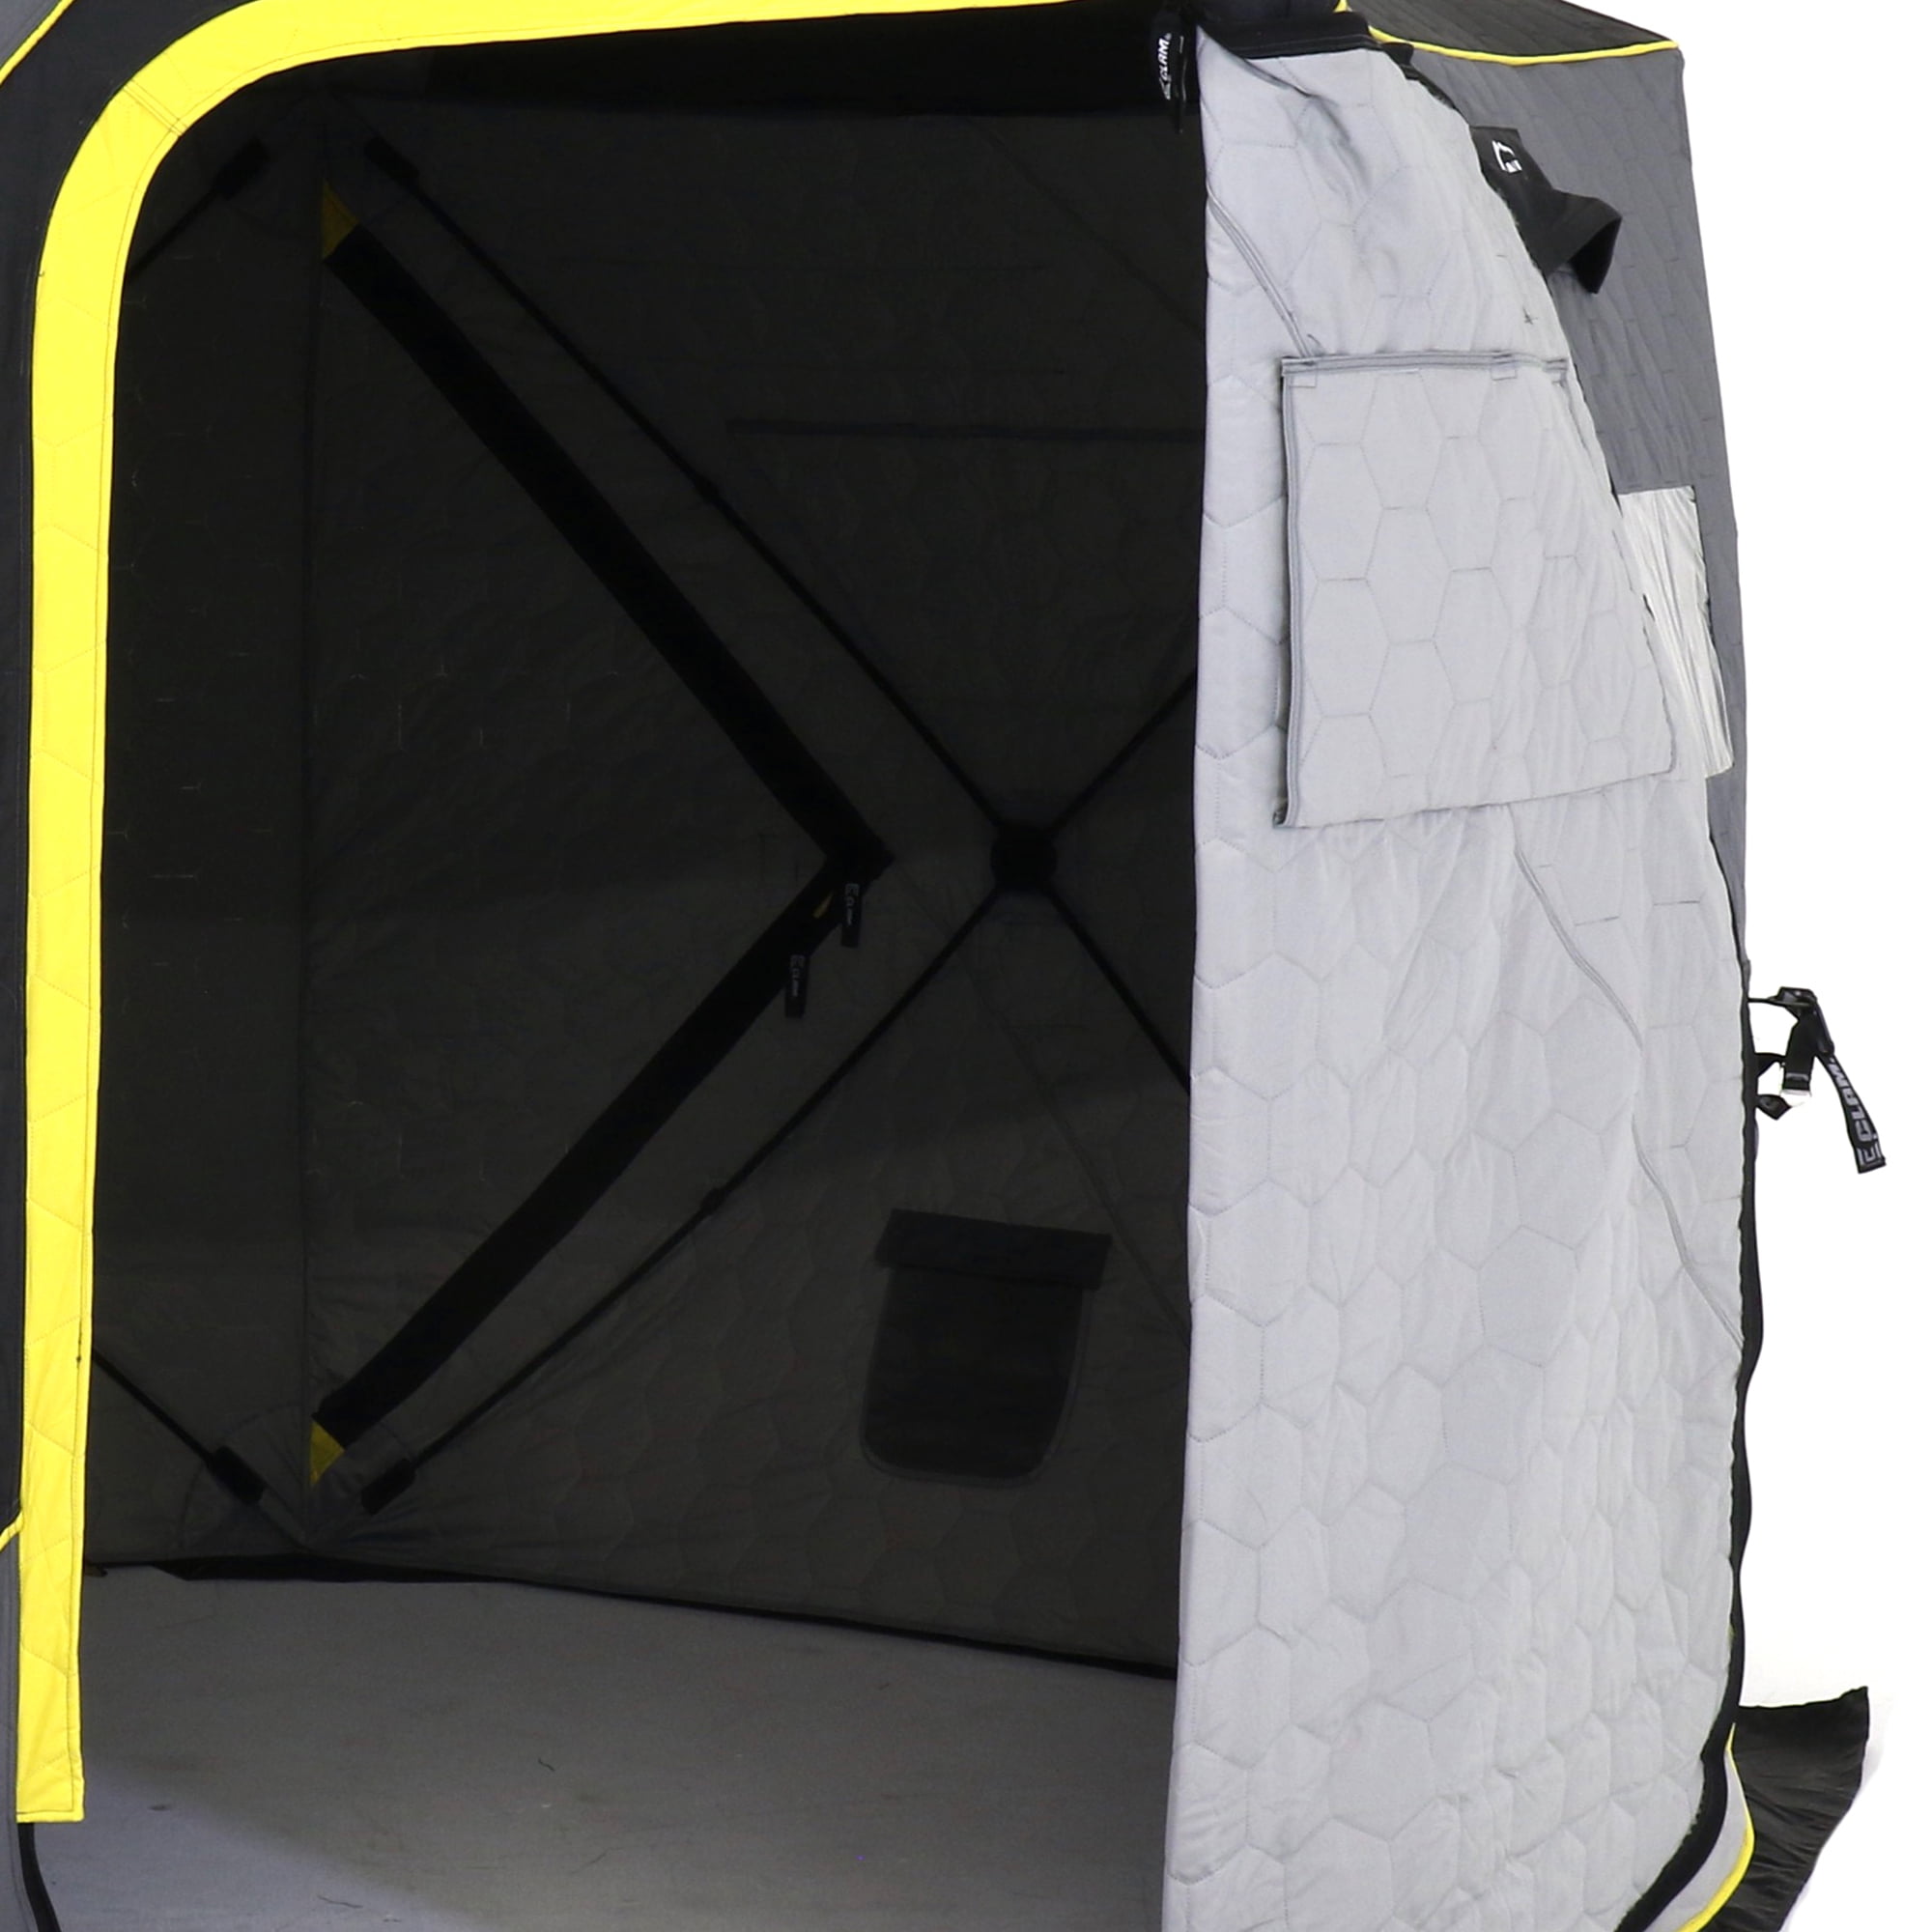 CLAM X-800 Portable 7 Person 15' x 8' Ice Fishing Thermal Hub Shelter Tent  